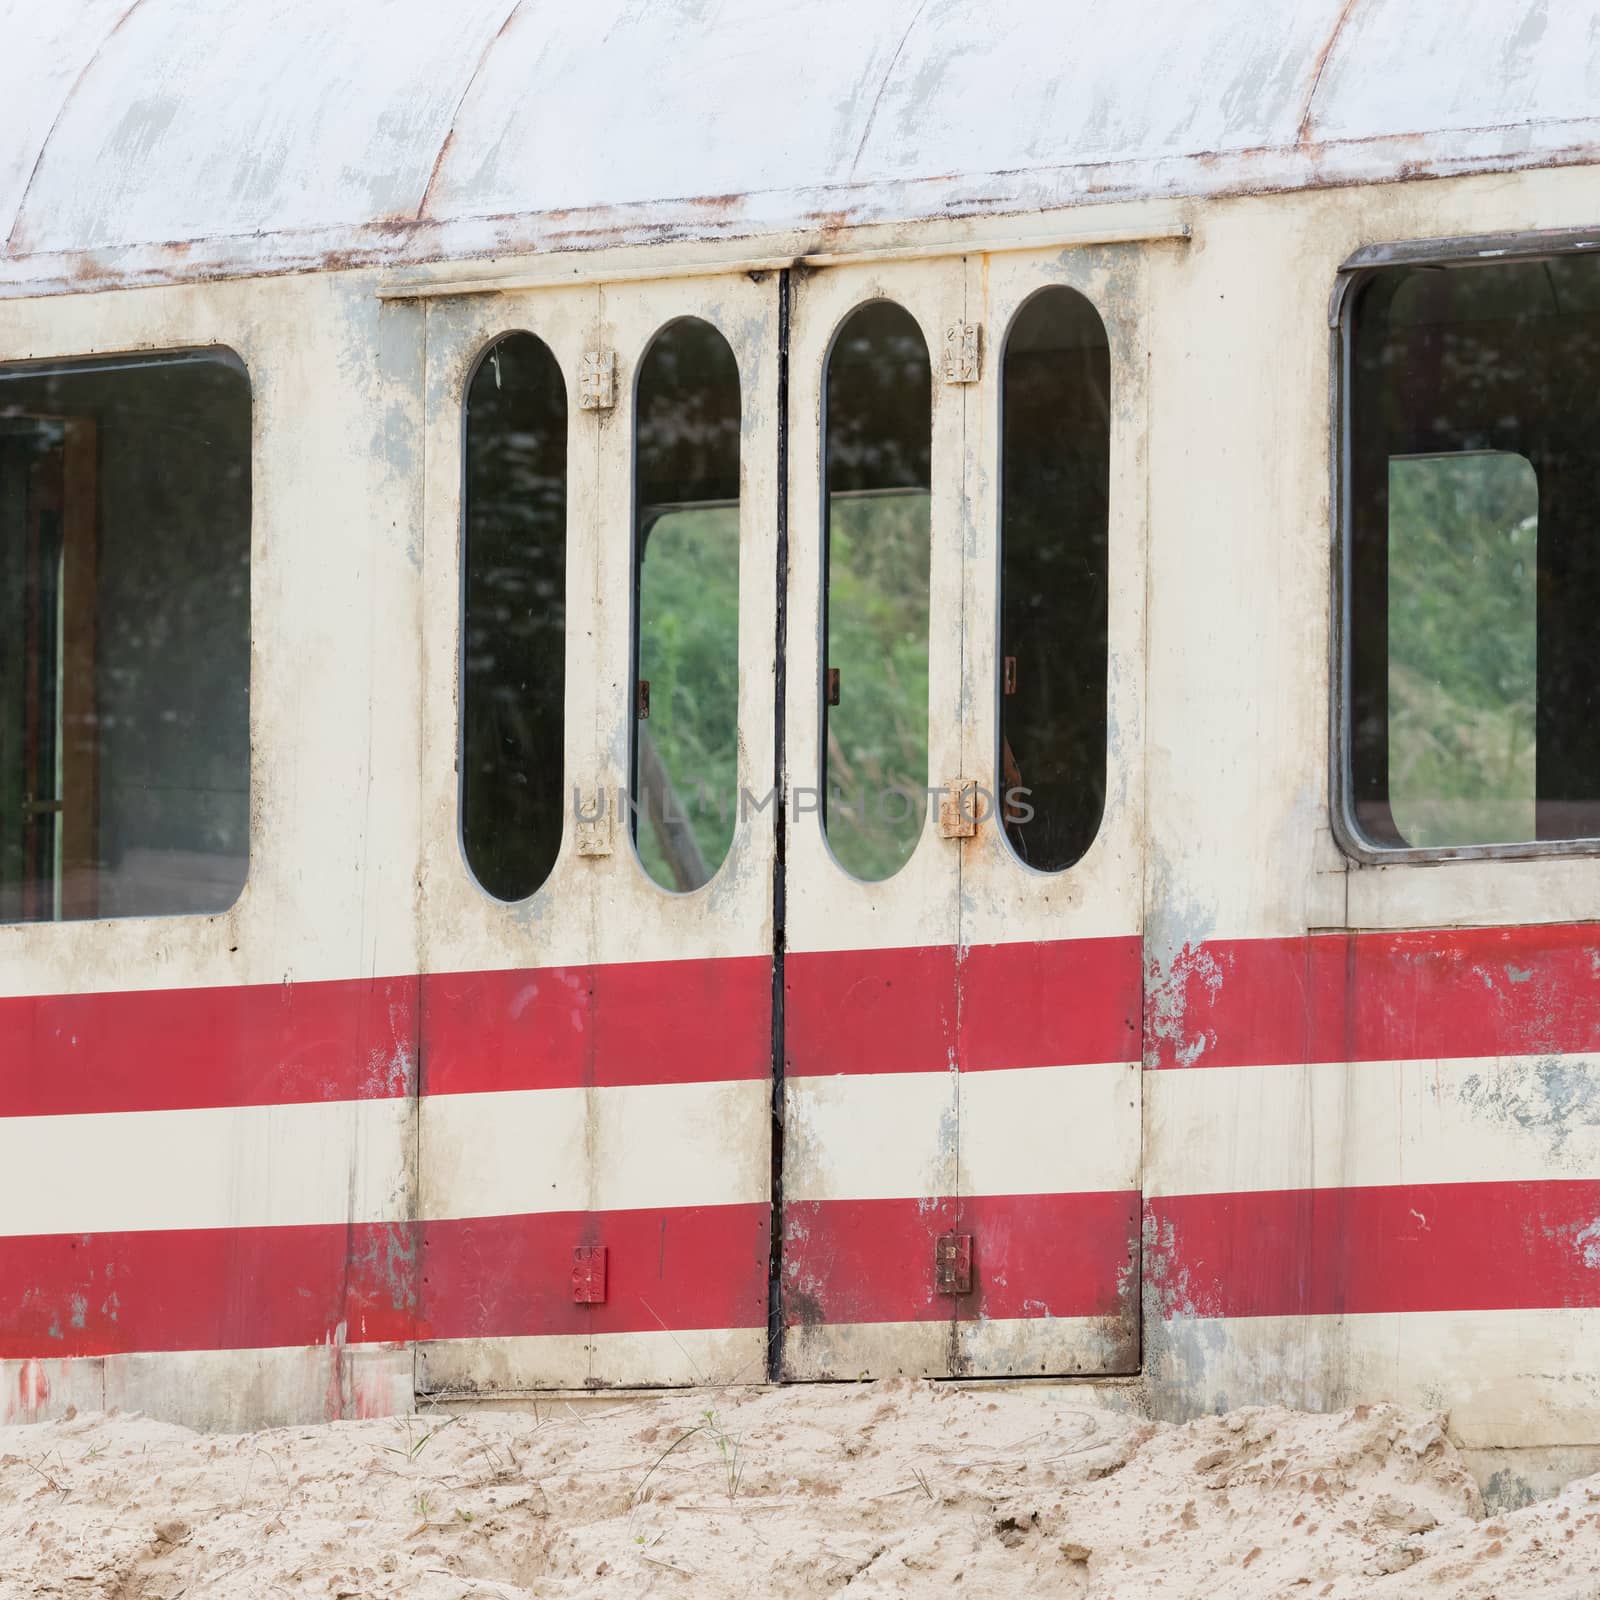 Old train carriage lying still in the rough sandy terrain